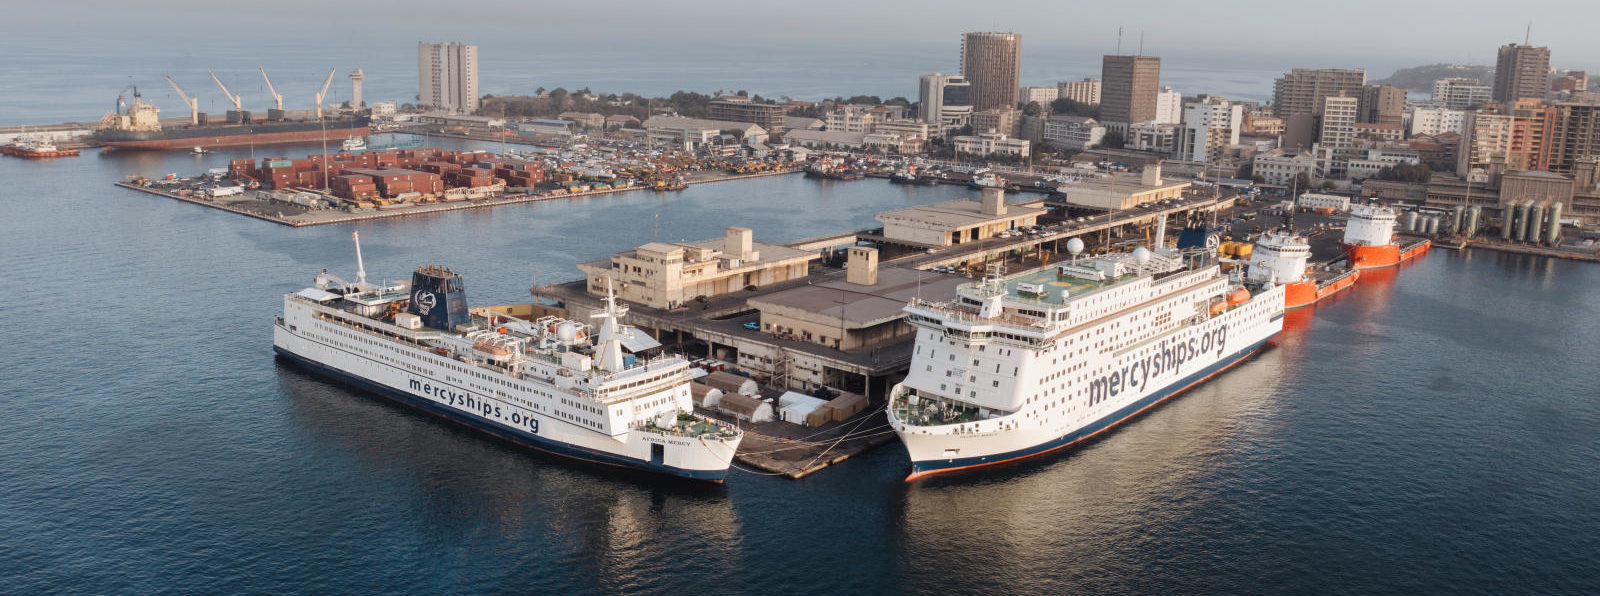 The Global Mercy docked next to the Africa Mercy shortly after arriving in Africa for the first time in Dakar, Senegal.